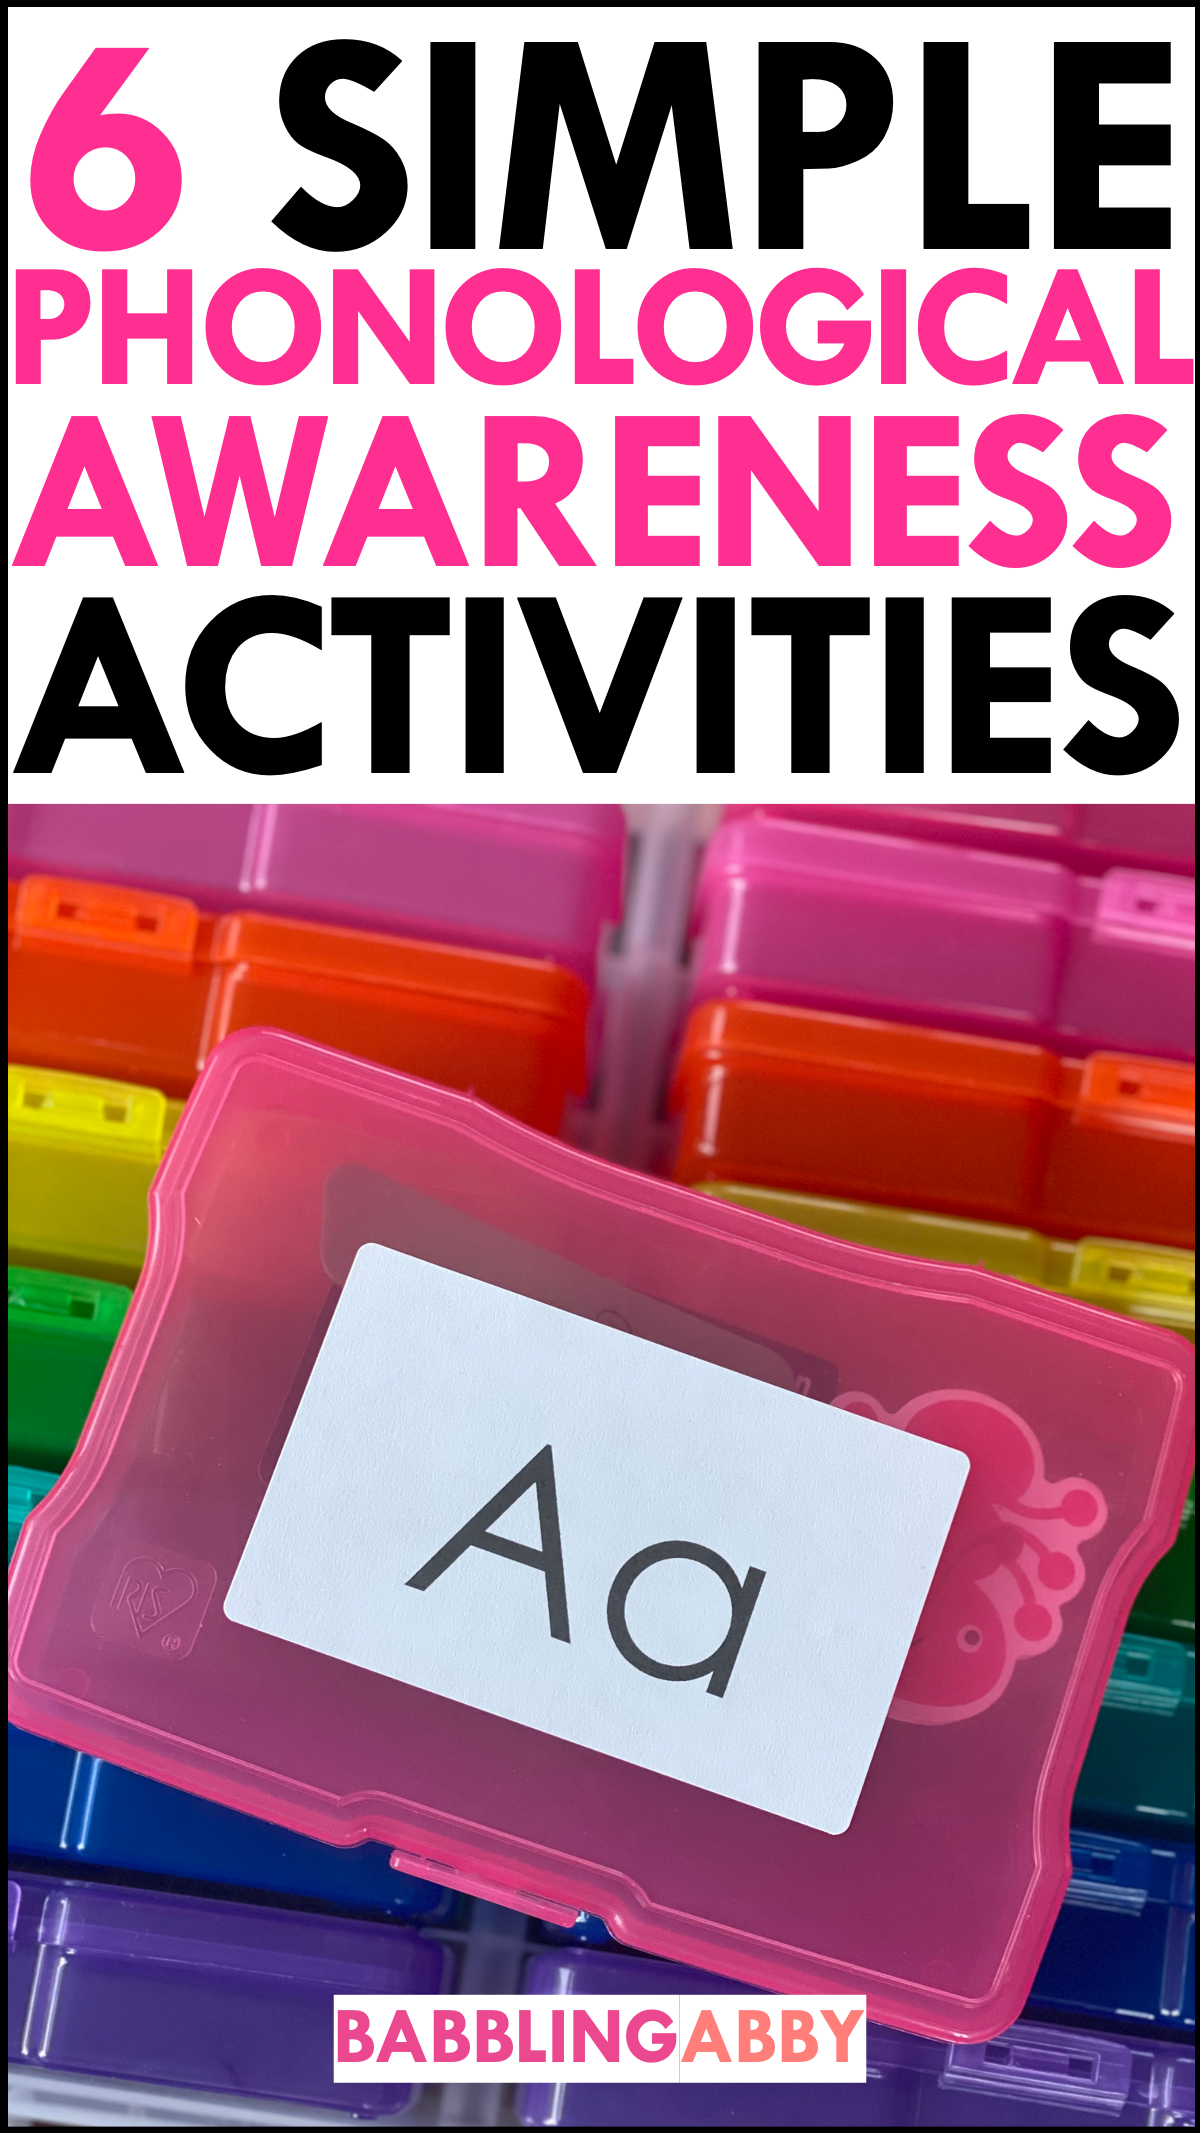 Check out 6 simple phonological awareness activities that you can easily use in the K-1 classroom to support reading foundational skills.